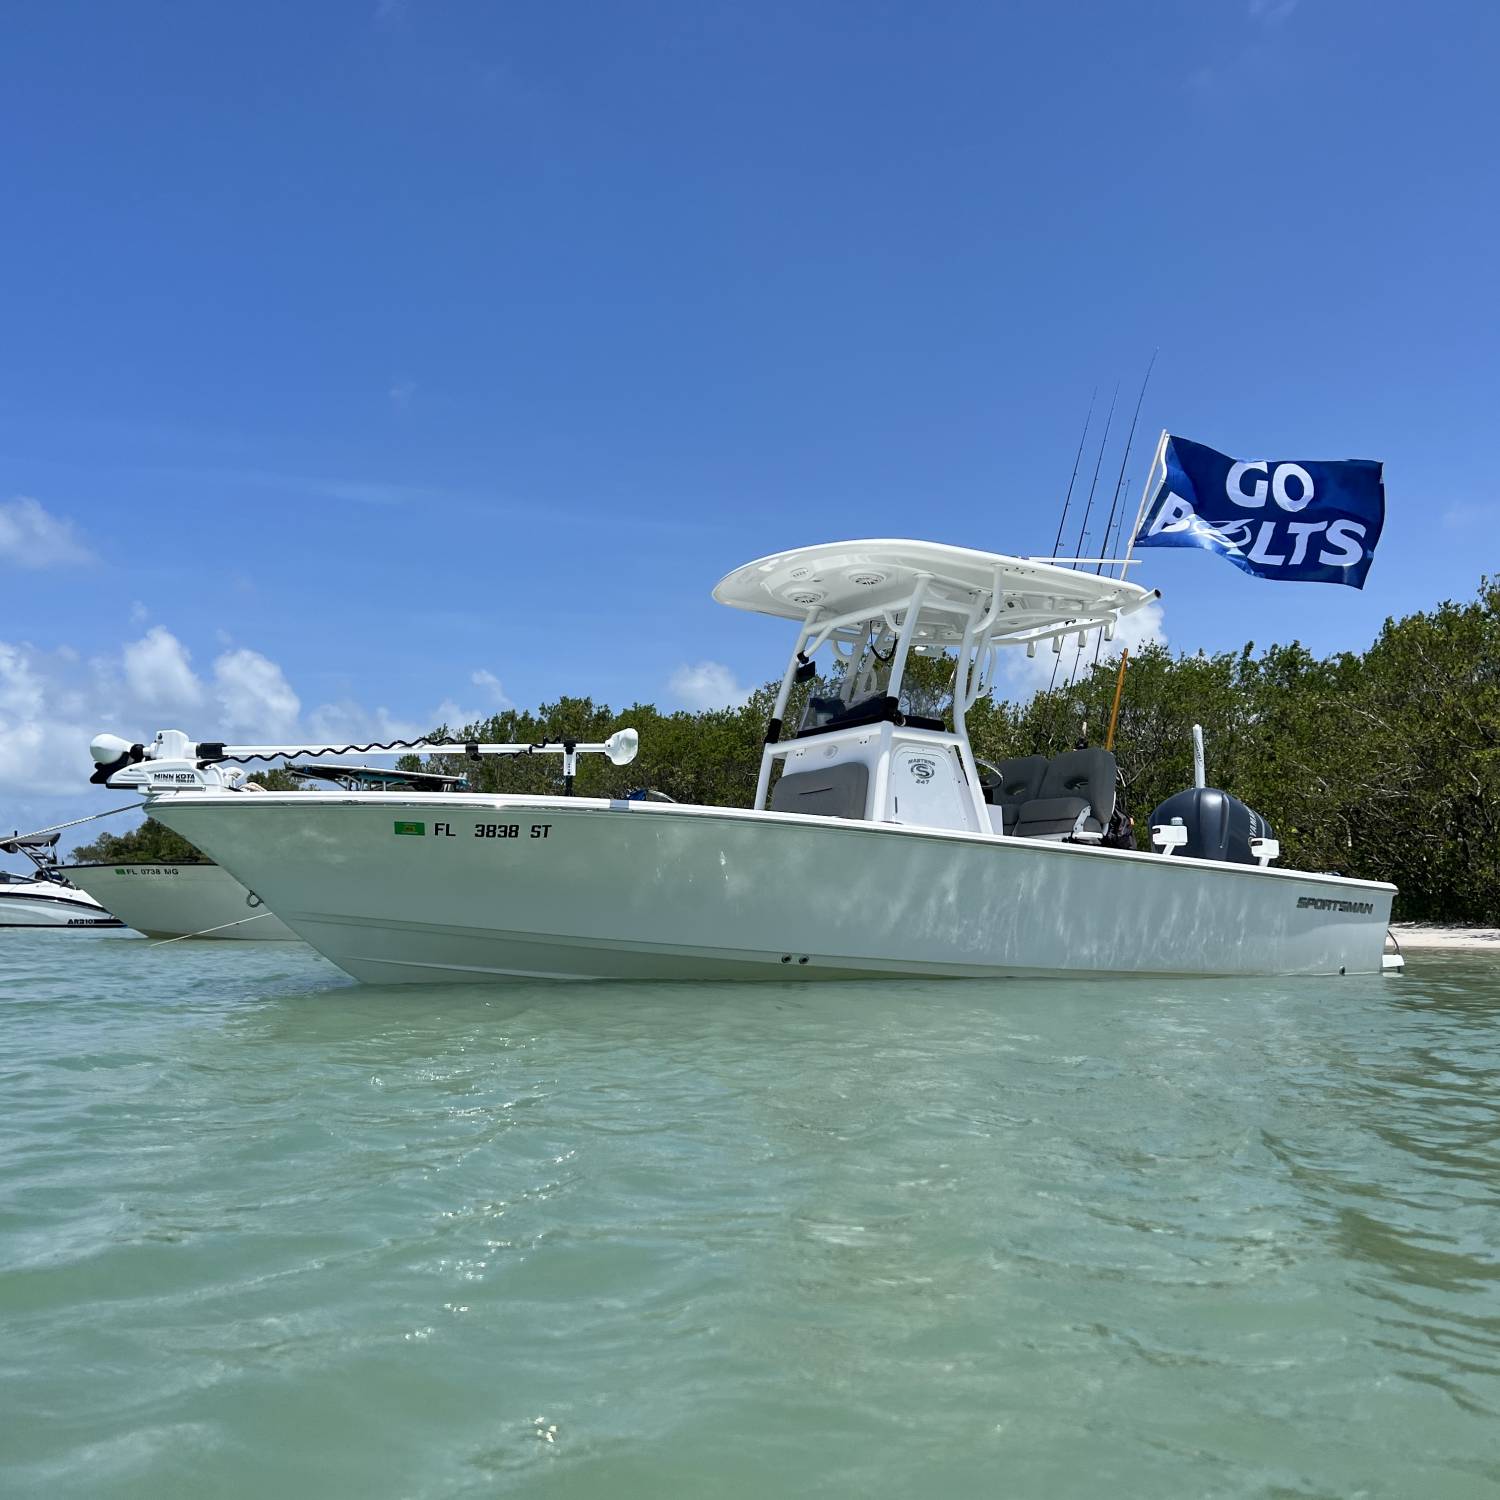 Title: Go Bolts!⚡️ - On board their Sportsman Masters 247 Bay Boat - Location: Stump Pass, Englewood Fl.. Participating in the Photo Contest #SportsmanJune